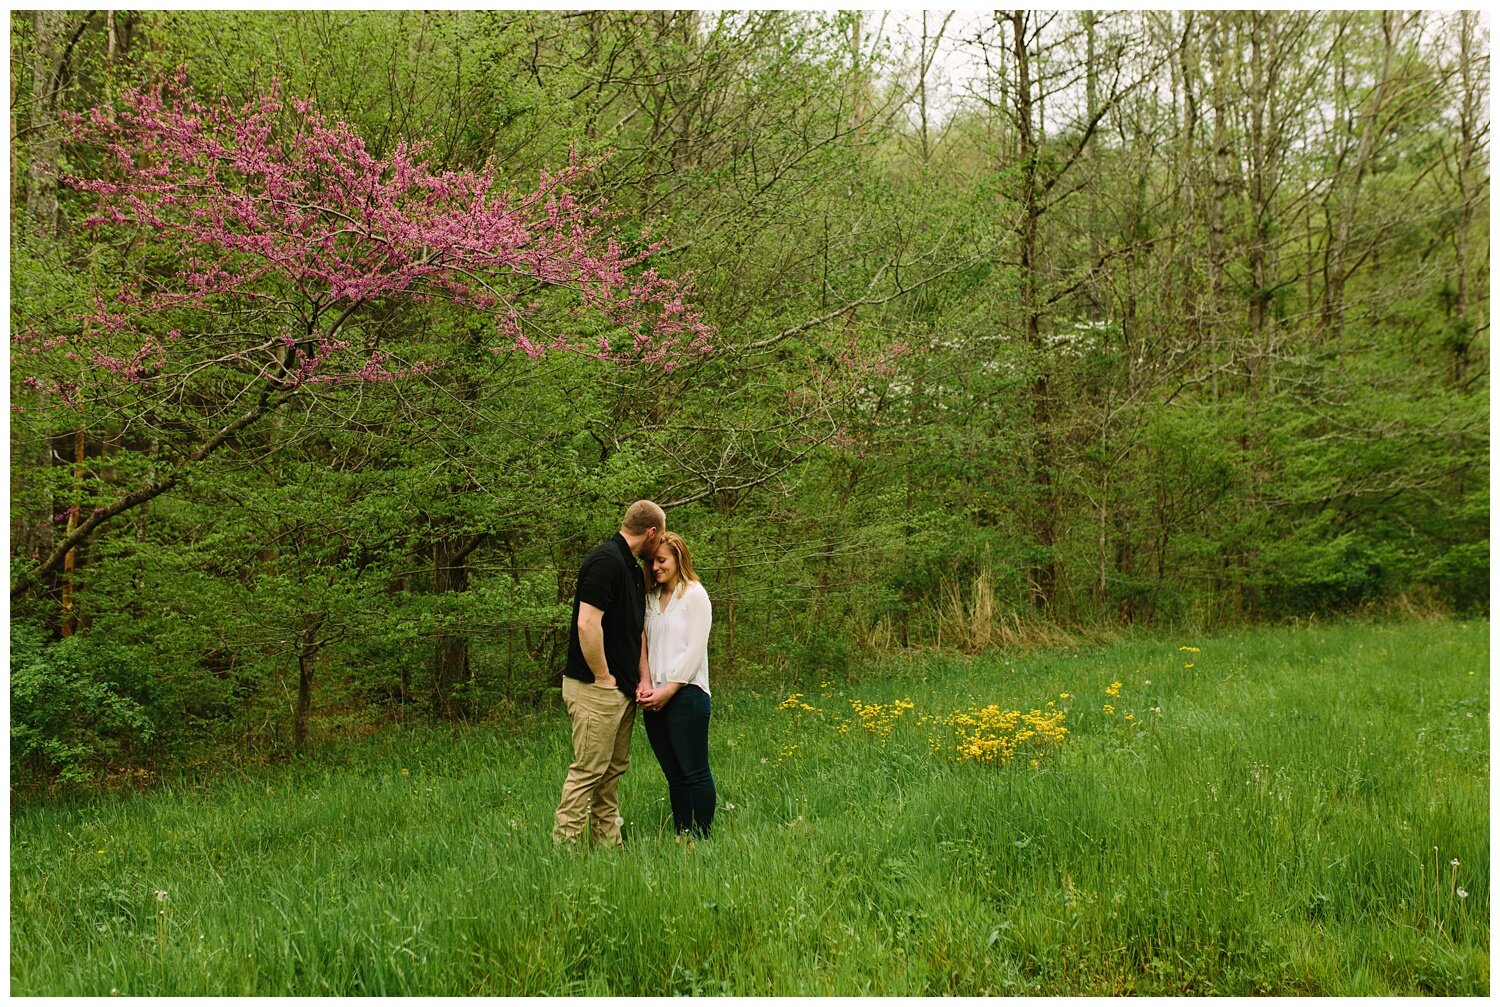 Kendra_Farris_Photography_Red_River_Gorge_Engagement_Photos-28.jpg